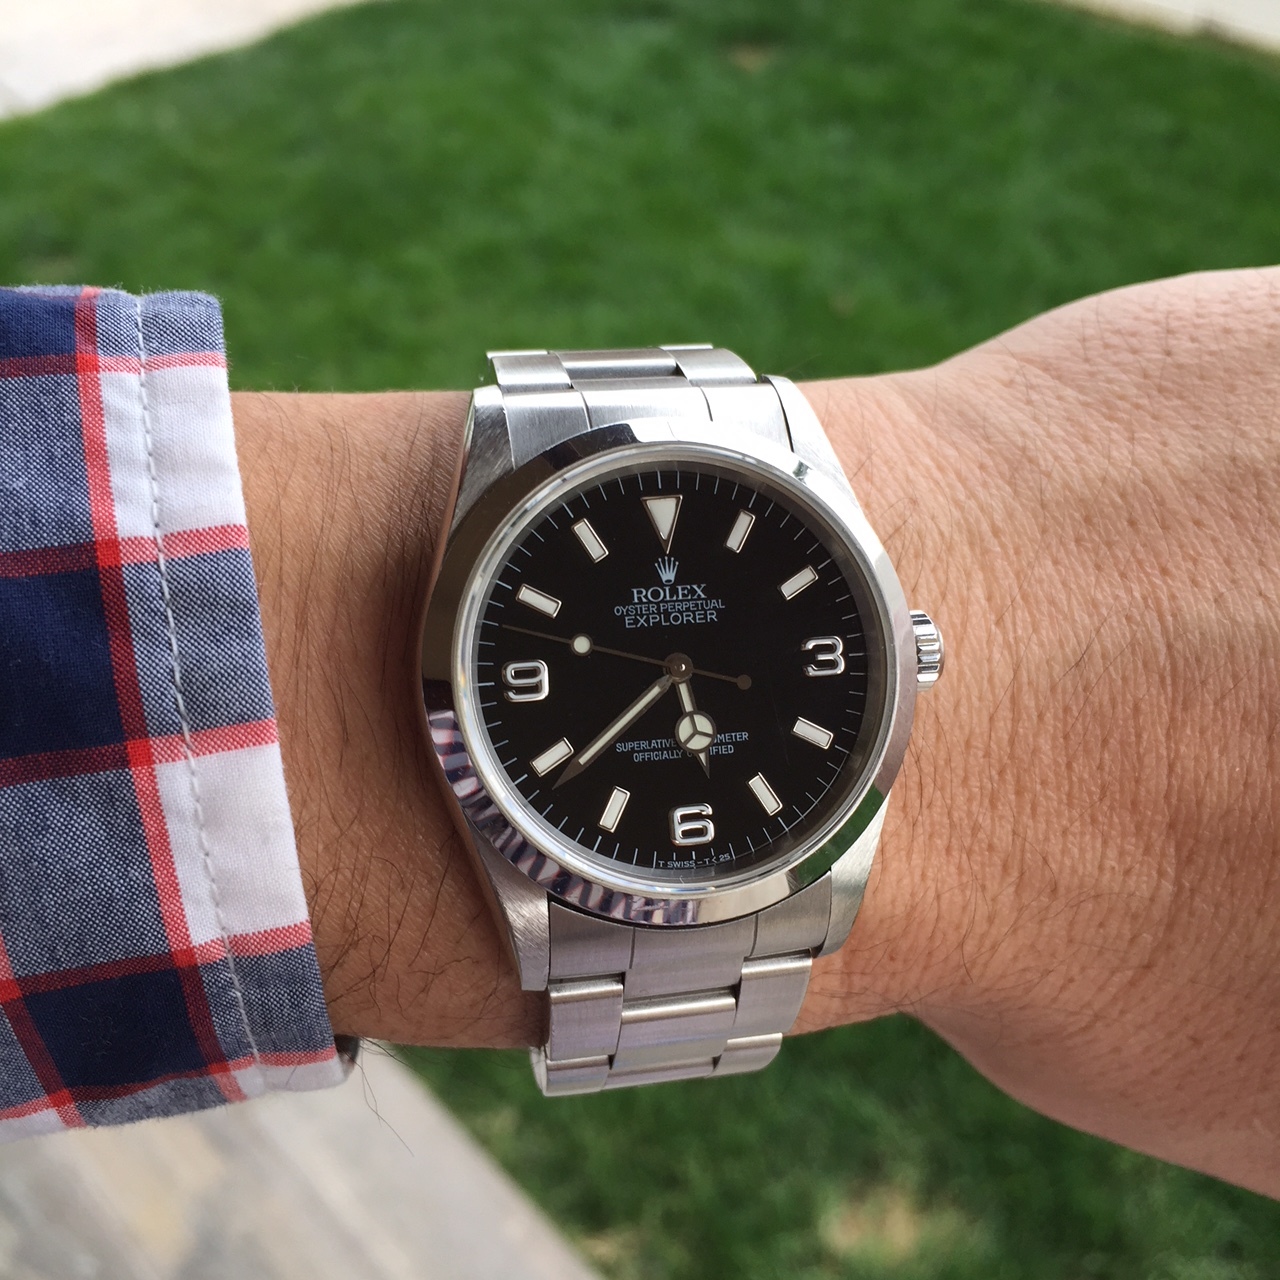 Falling in love with the Rolex Explorer 